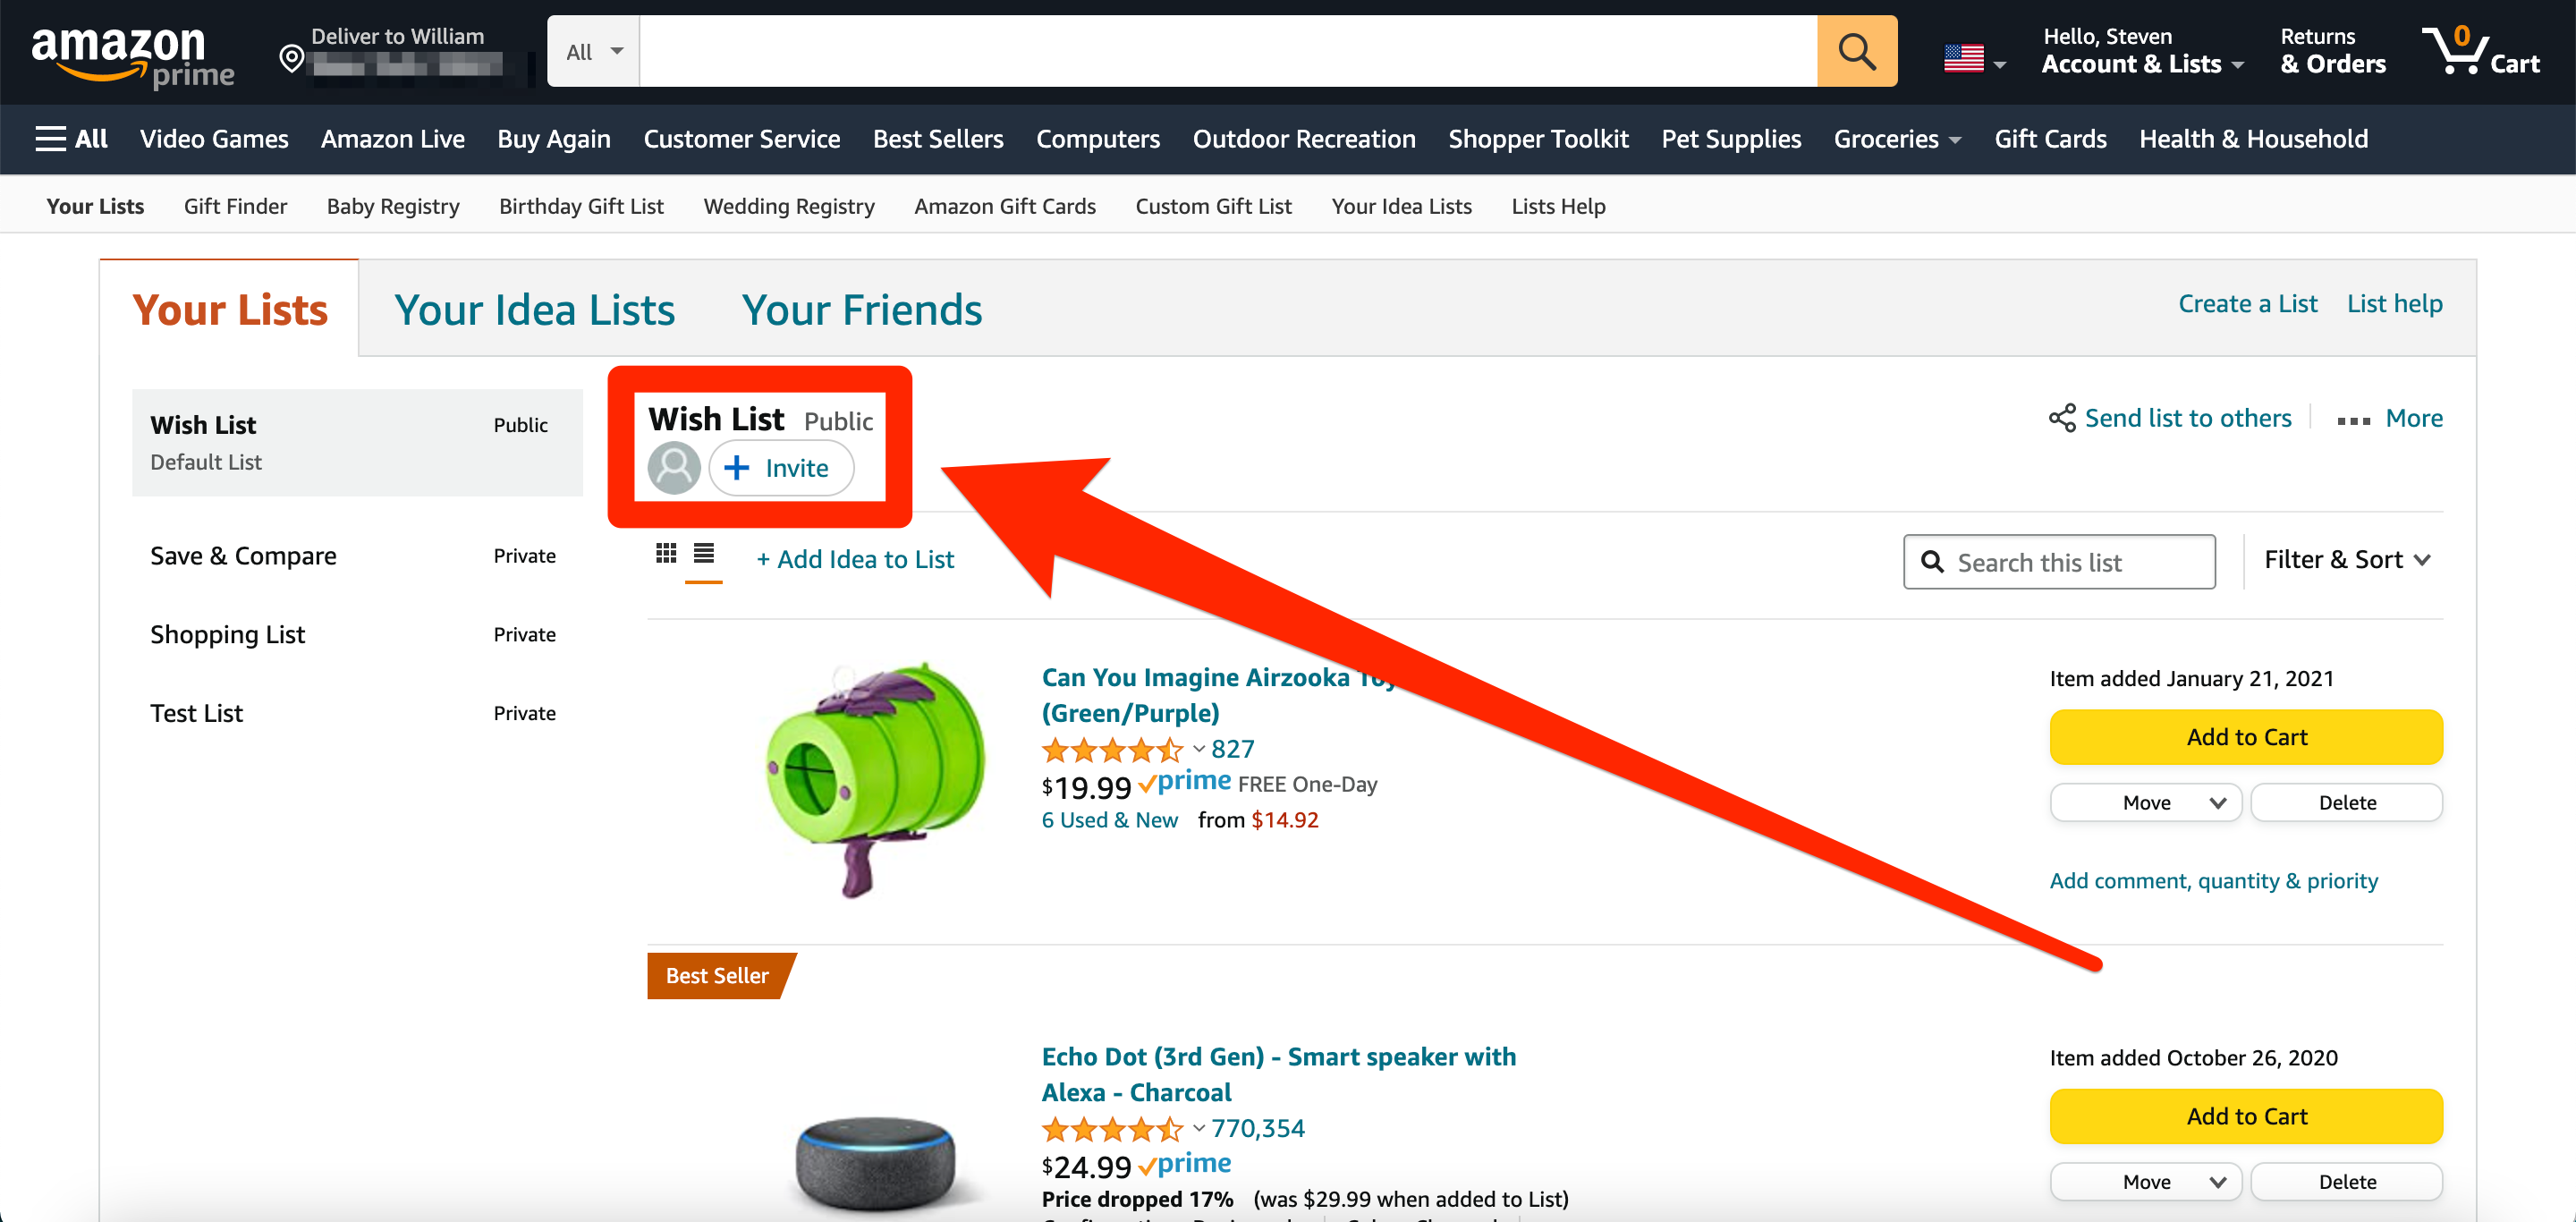 An Amazon Wish List. The "Invite" option is highlighted.